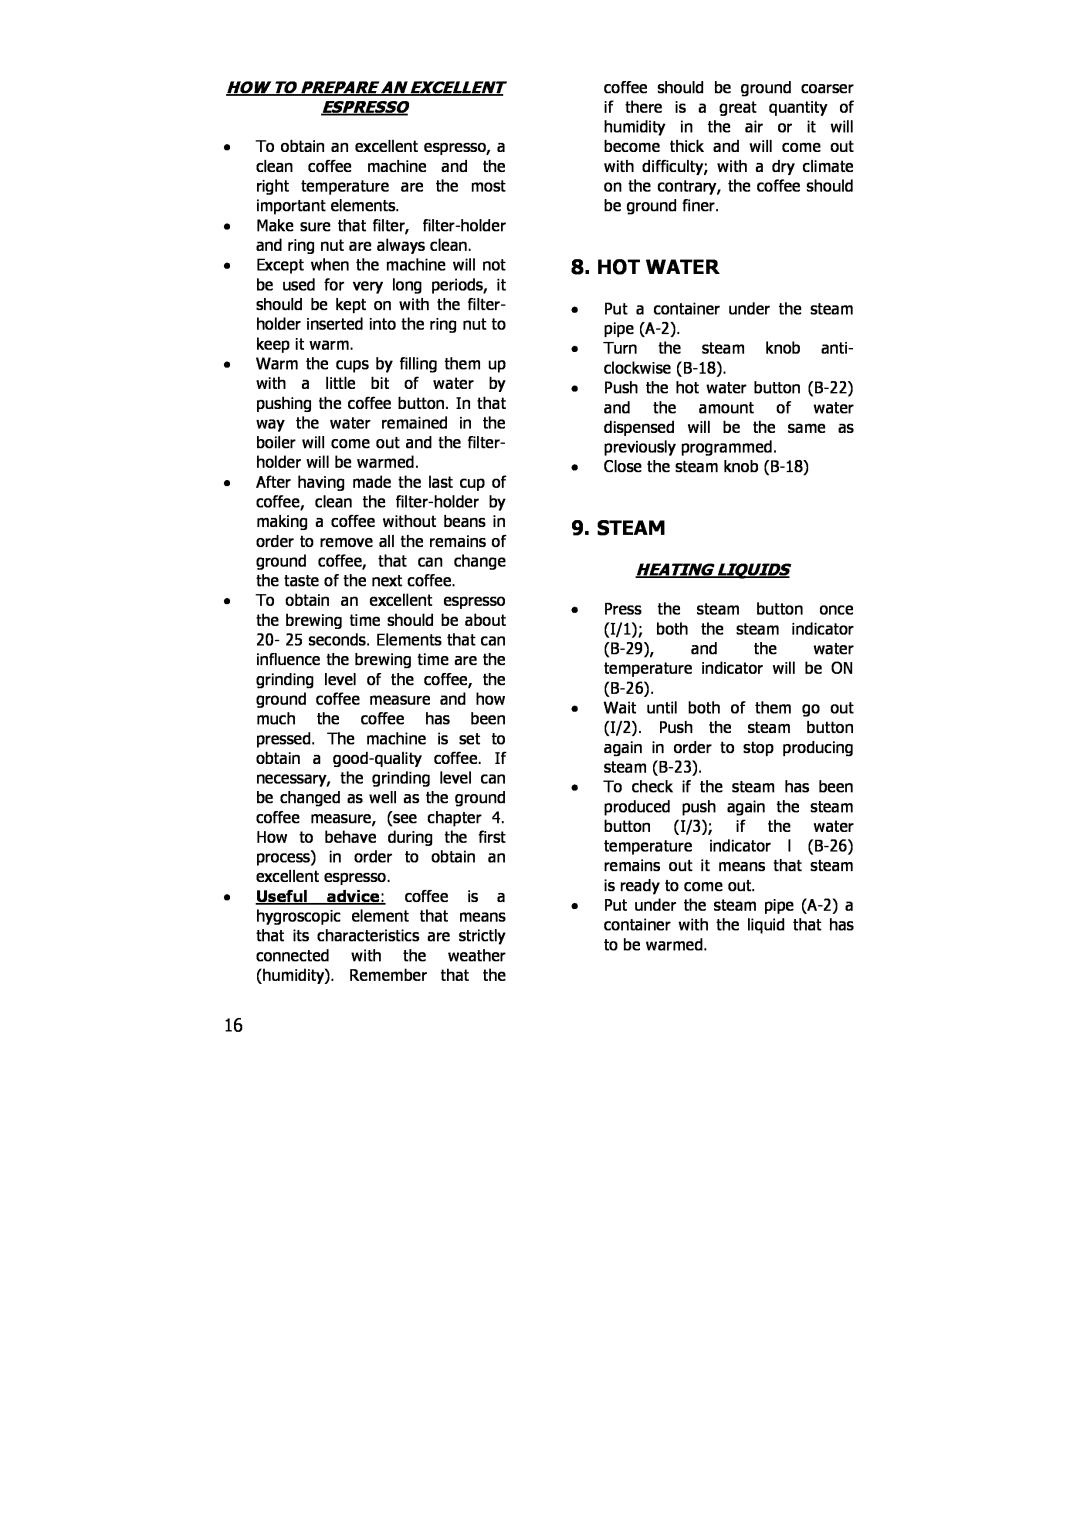 Electrolux PE 8036-M installation instructions Hot Water, Steam, How To Prepare An Excellent Espresso, Heating Liquids 